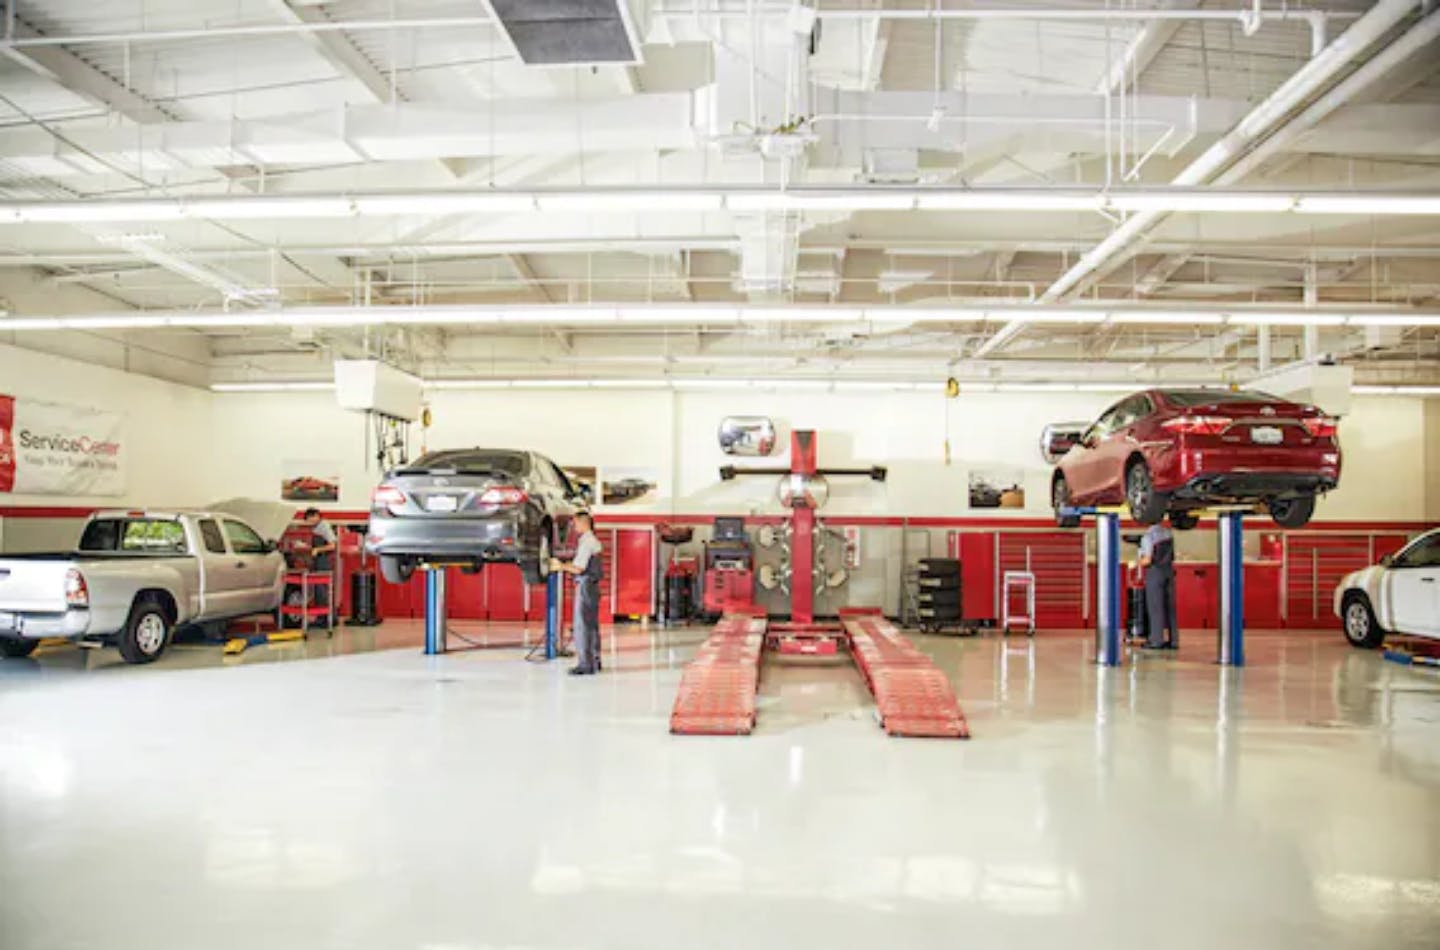 service garage with vehicles on rack